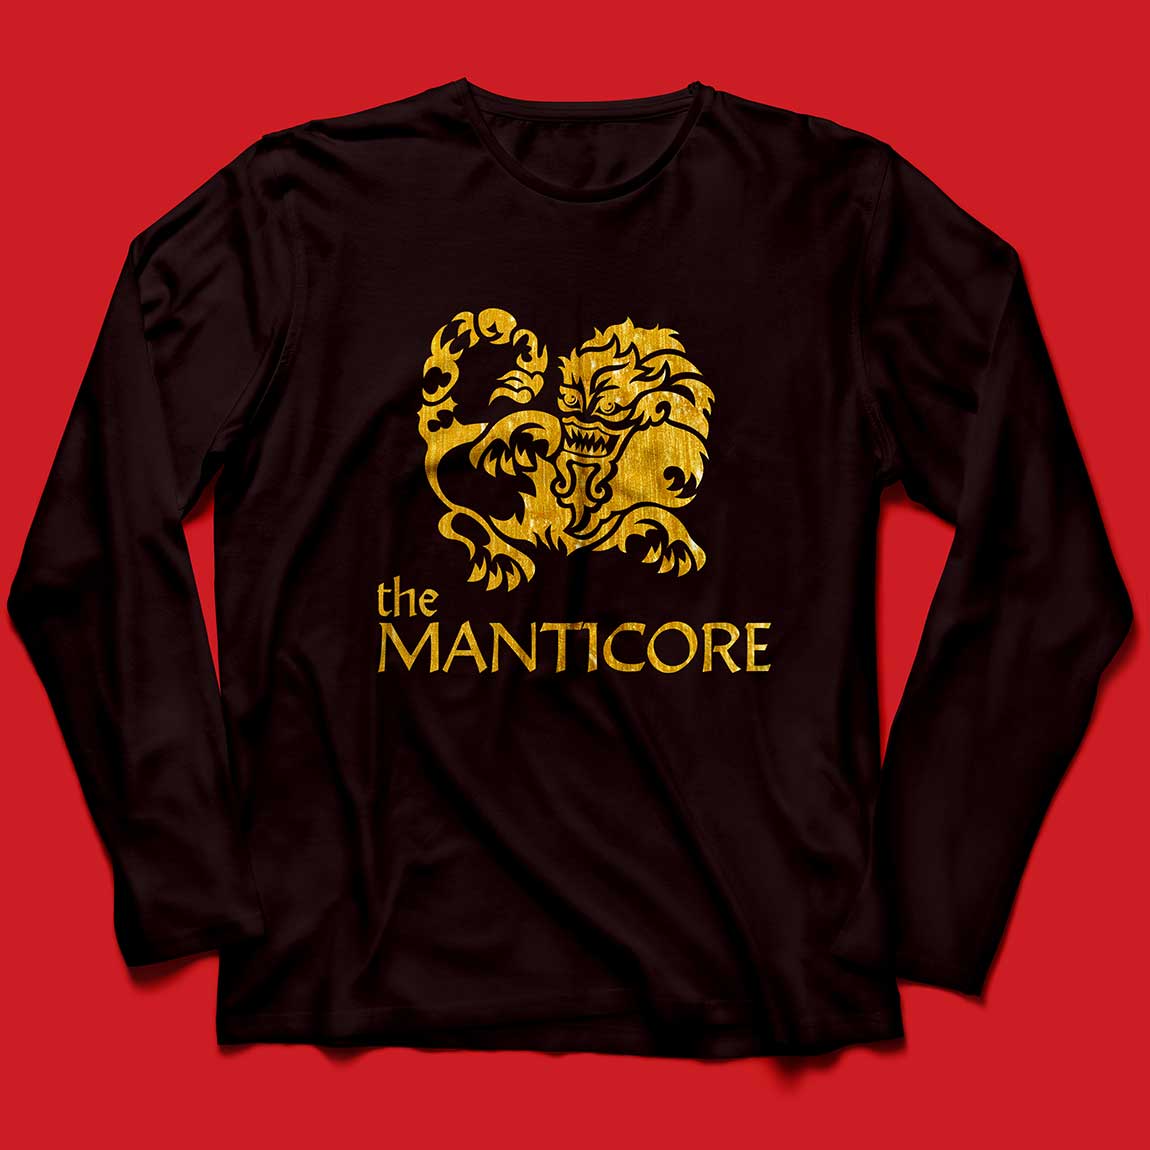 An image of a shirt with the Manticore symbol on it